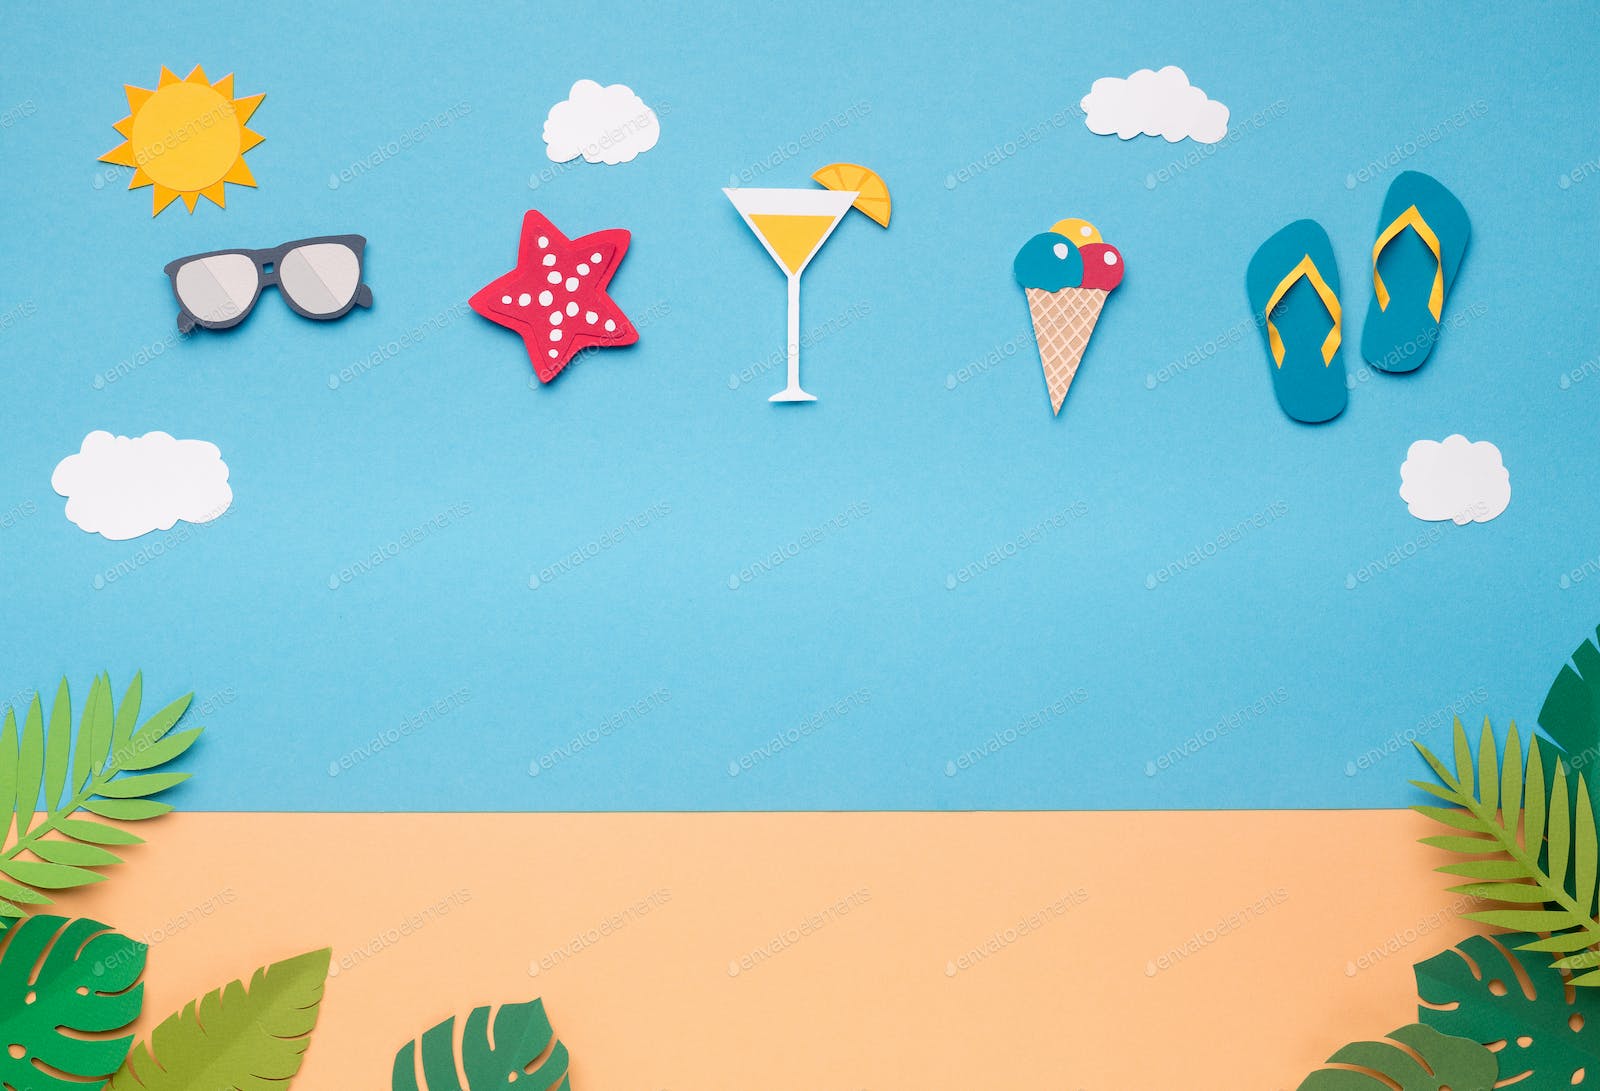 Creative Wallpaper With Party Beach Accessories In The Sky Photo By Prostock Studio On Envato Elements